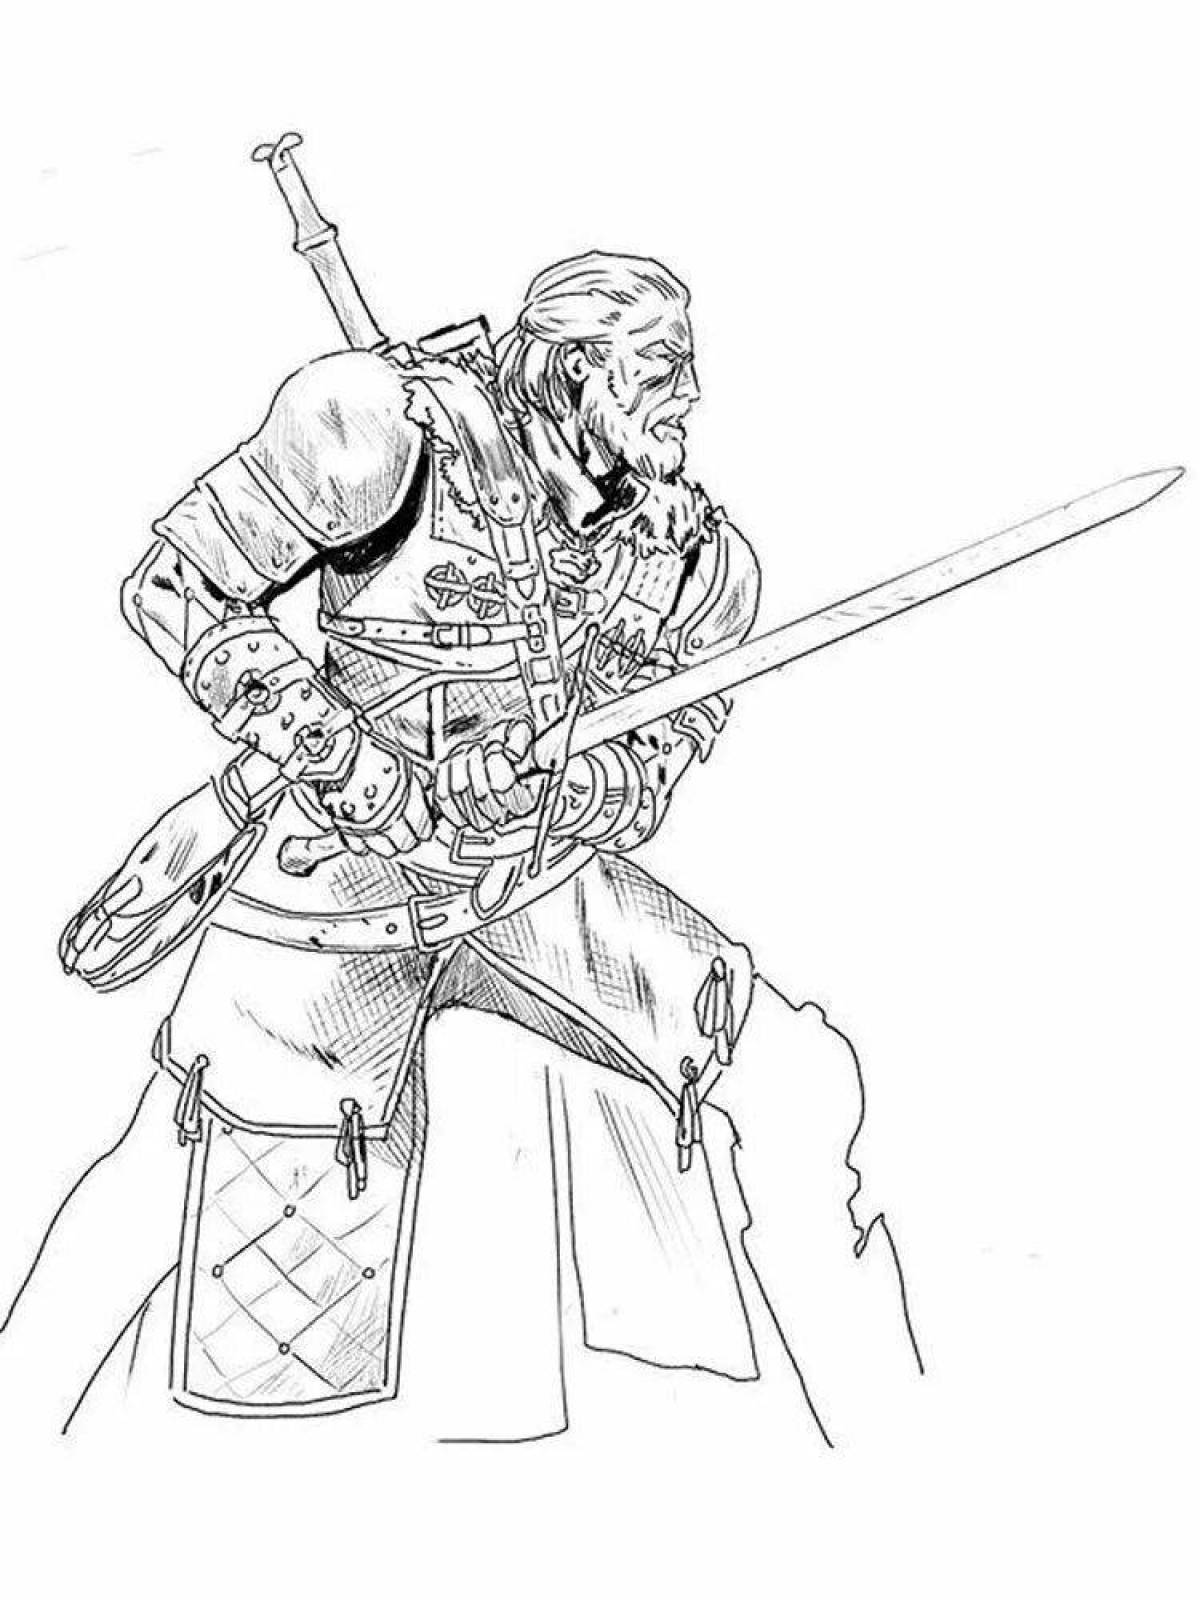 Rampant Witcher 3 coloring book